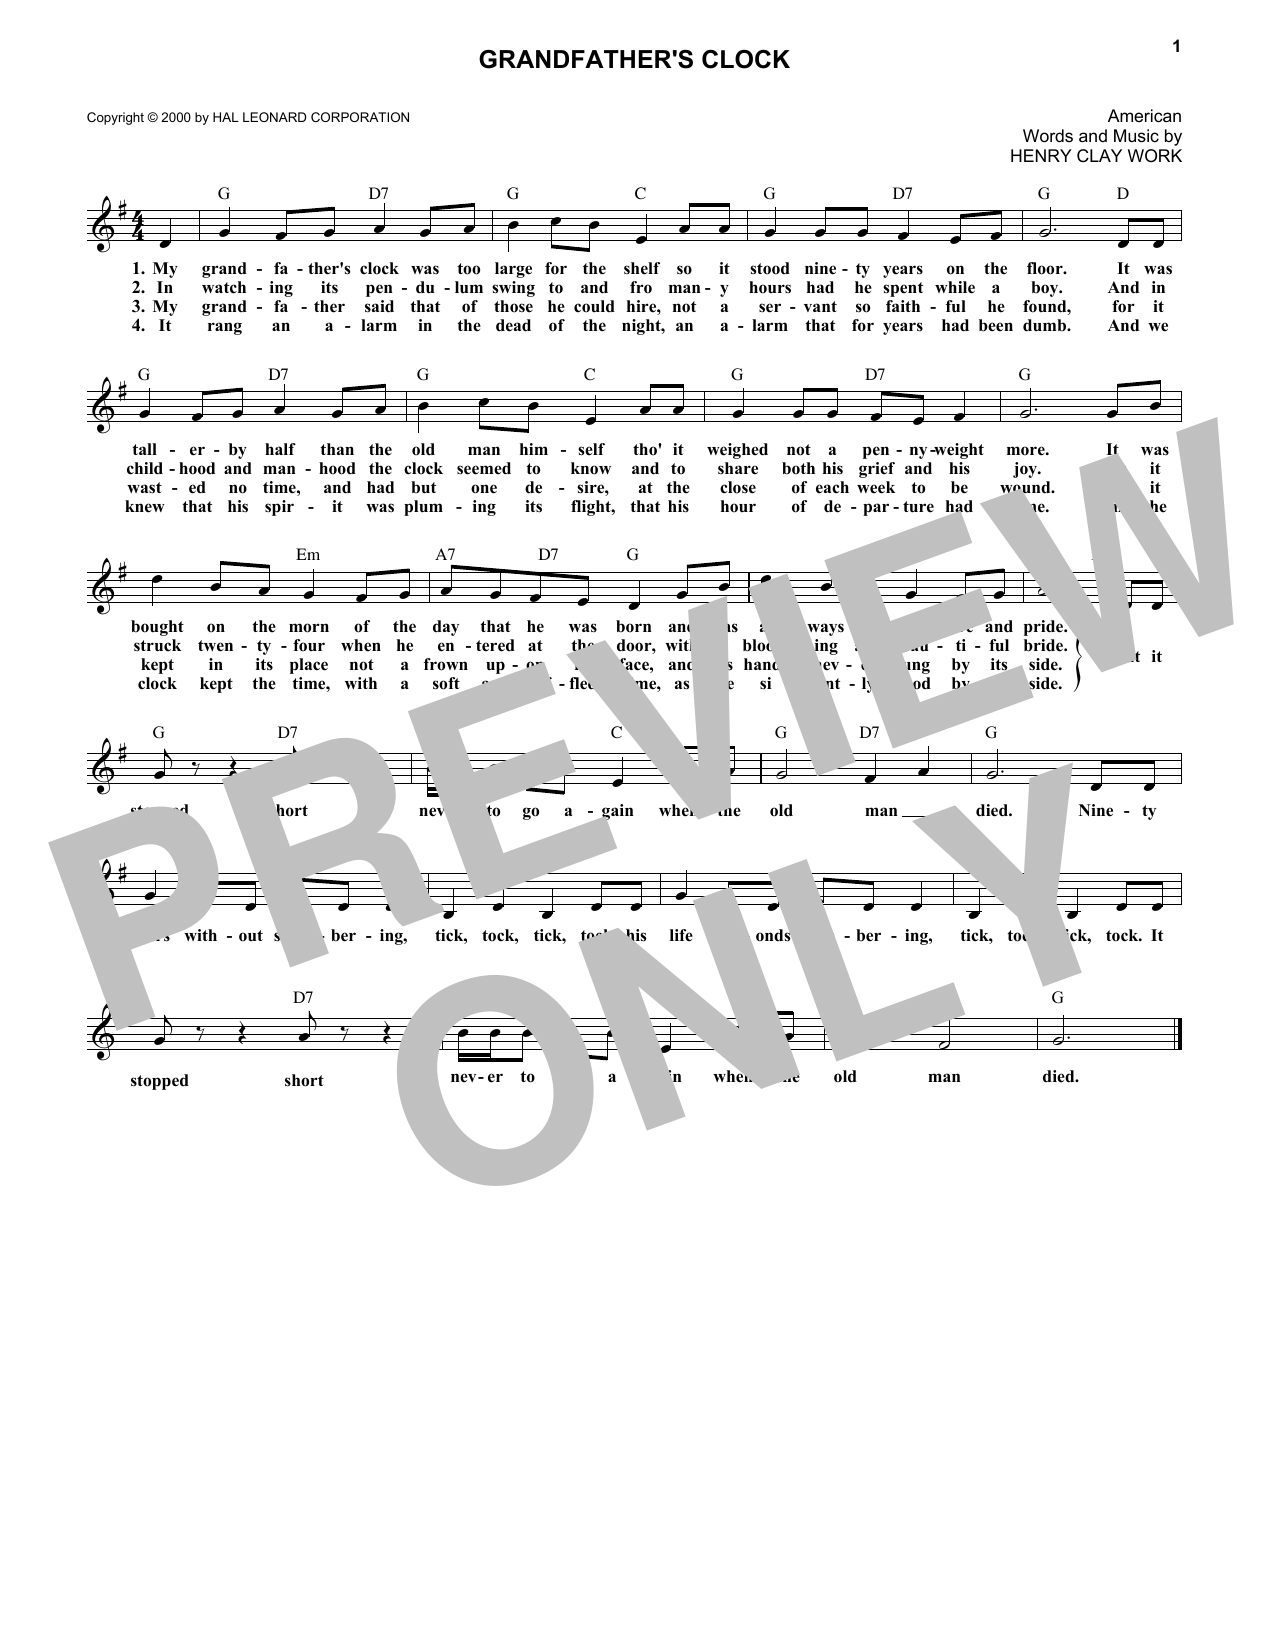 Download Henry Clay Work Grandfather's Clock Sheet Music